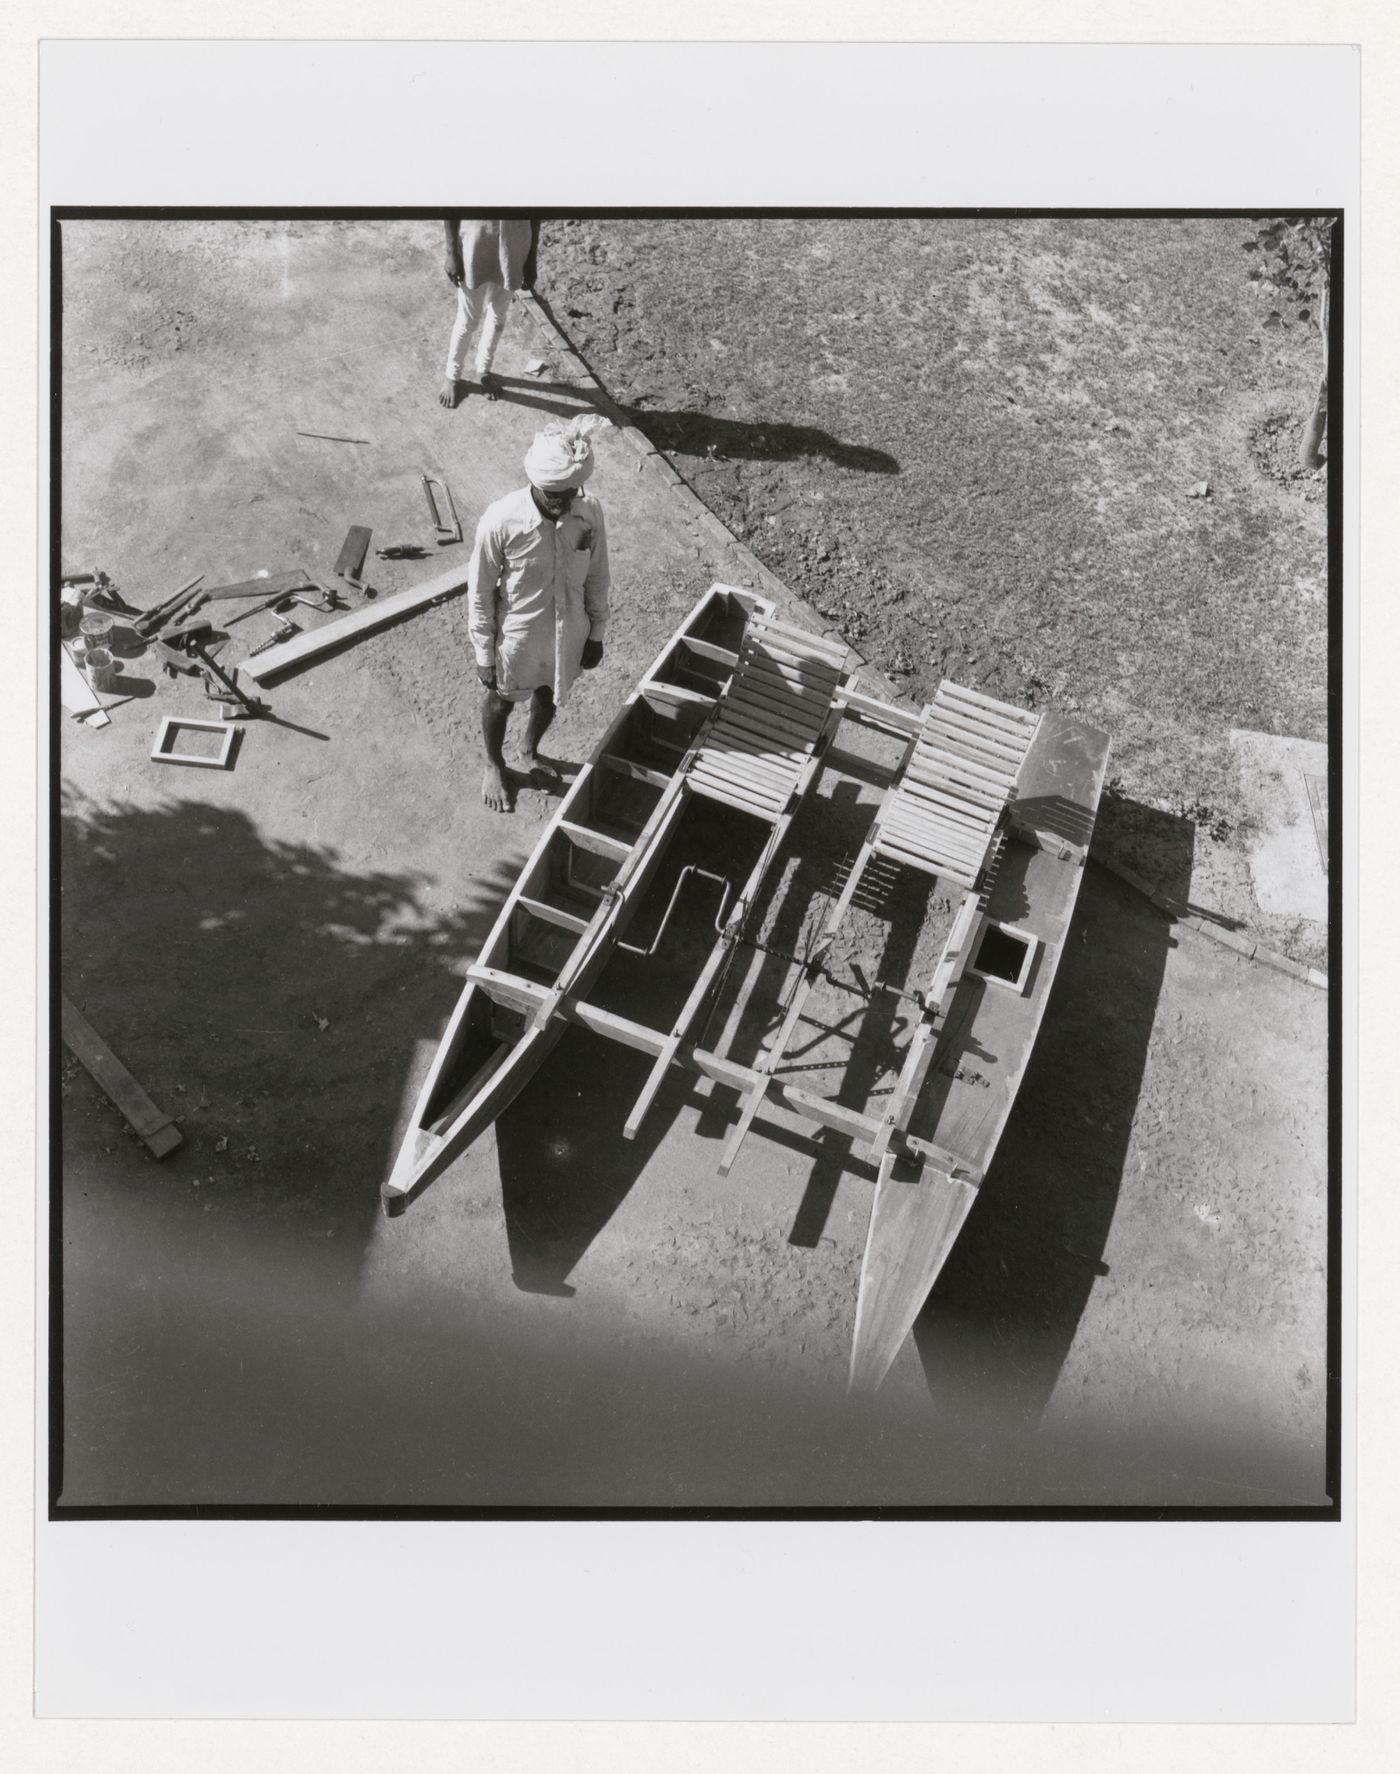 View of a pedal boat under construction, Chandigarh, India